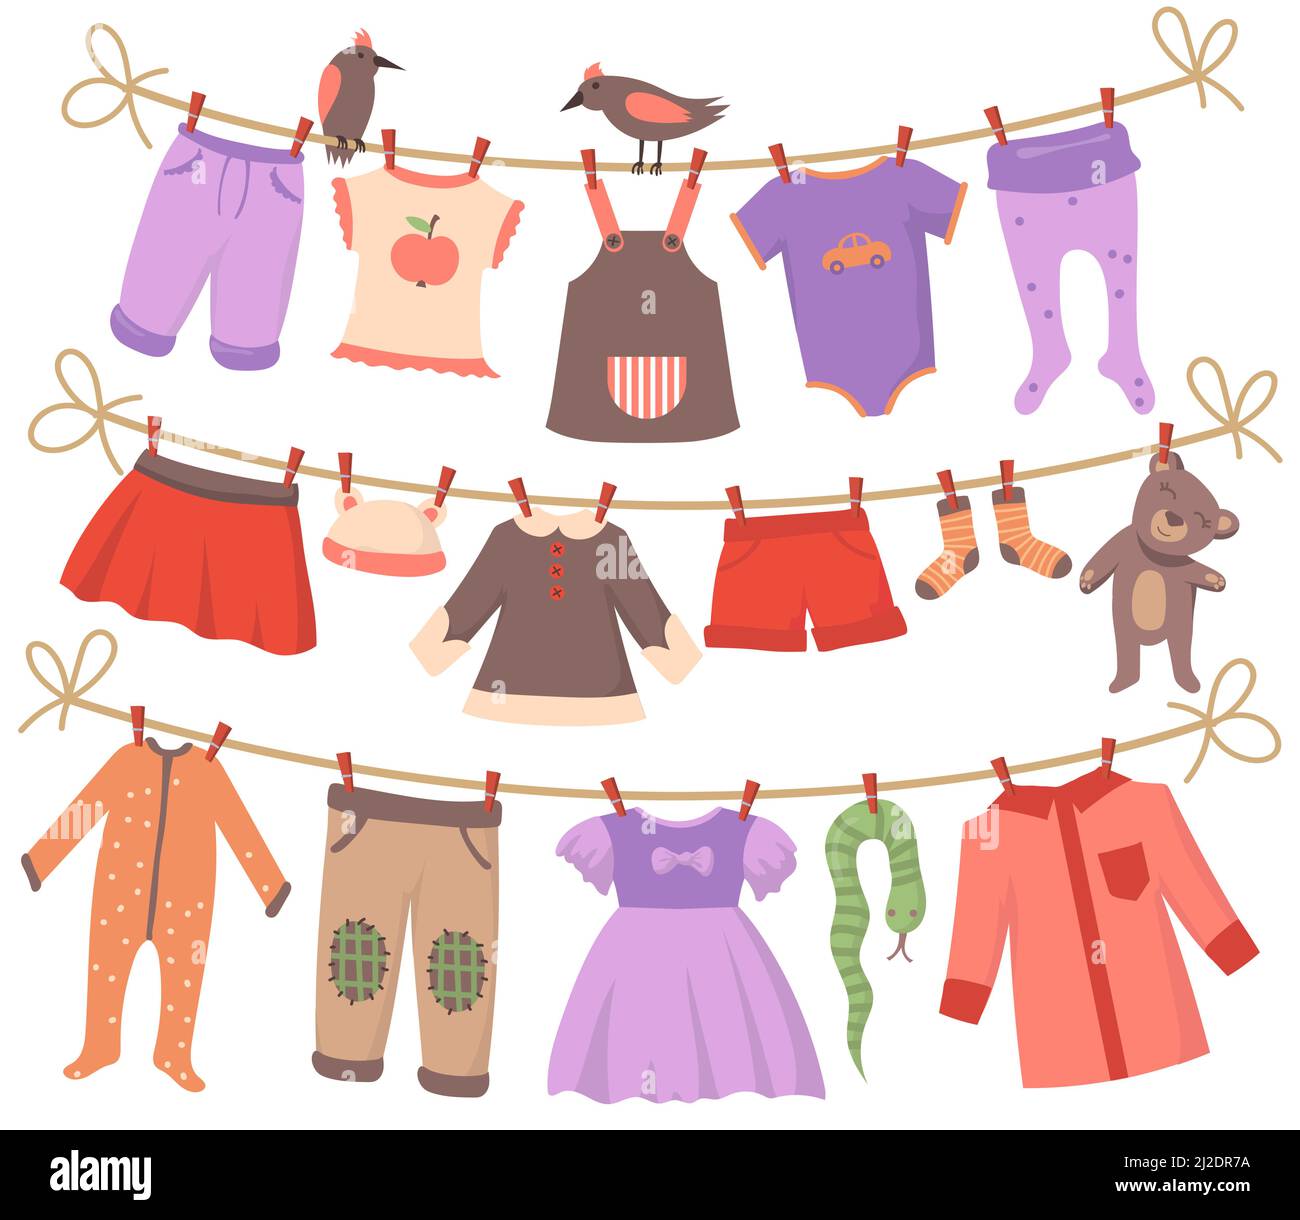 Drying baby clothes set. Clean small bodies, dresses, pants, shorts, socks, pajamas, toys hanging on ropes with birds. Vector illustrations collection Stock Vector